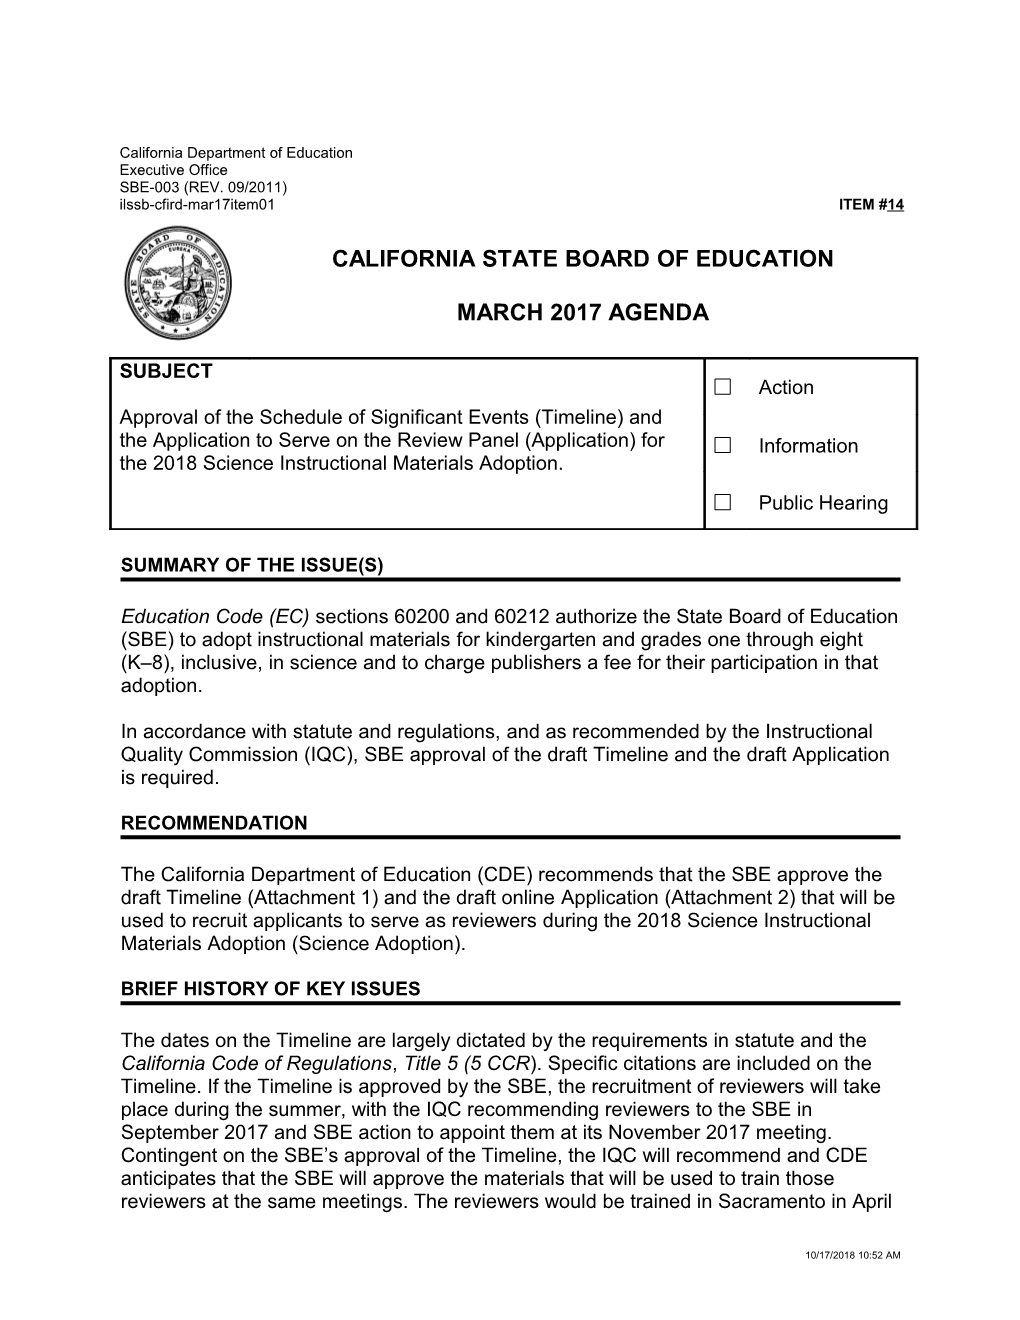 March 2017 Agenda Item 14 - Meeting Agendas (CA State Board of Education)